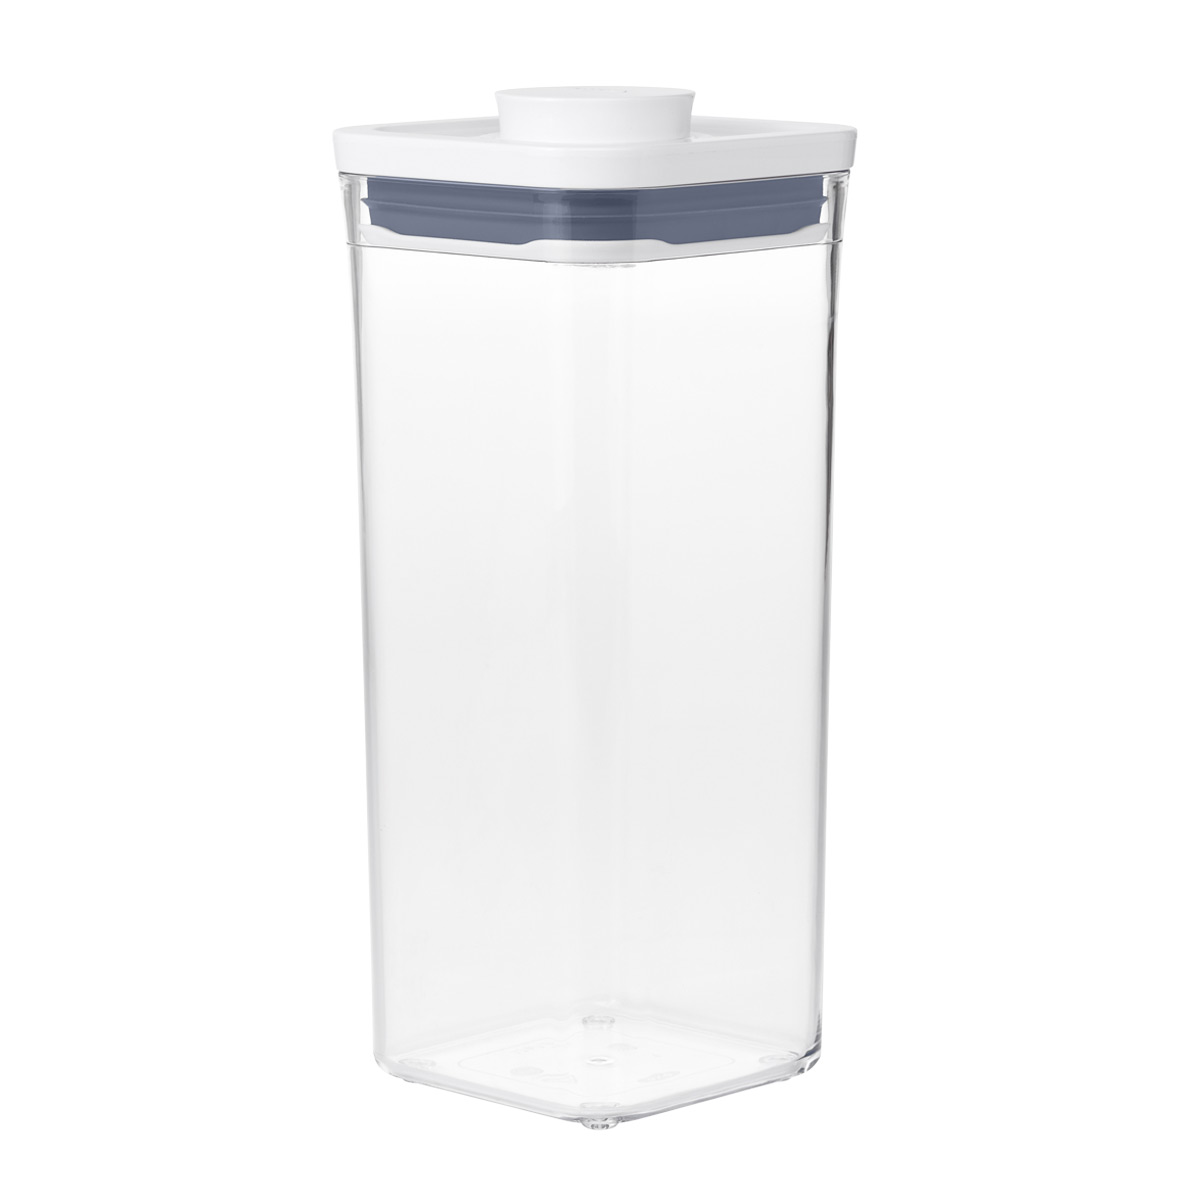 OXO Good Grips 6.0 Qt. Big Square Tall POP Food Storage Container with  Airtight Lid 11233400 - The Home Depot